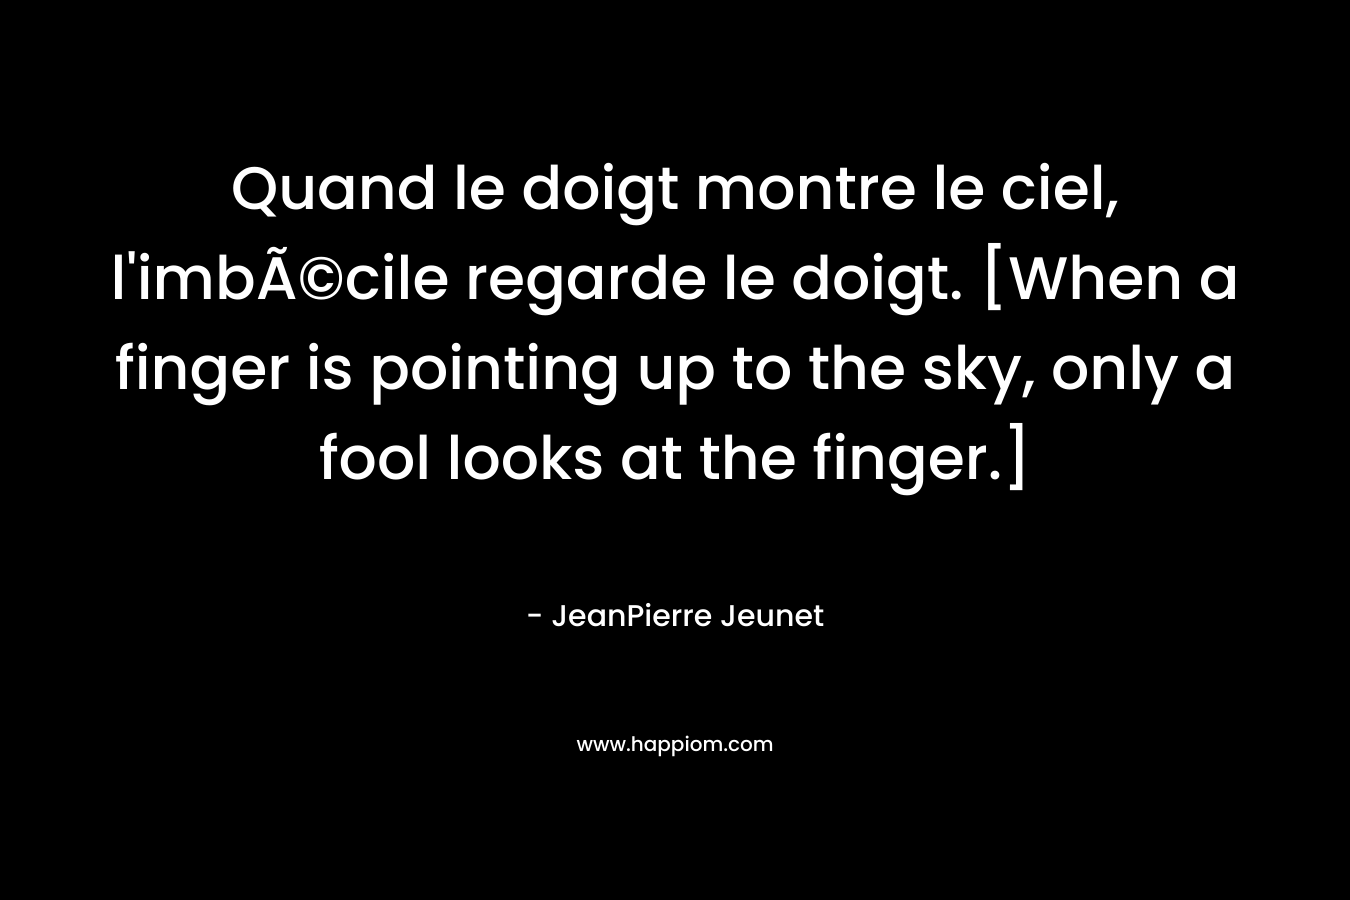 Quand le doigt montre le ciel, l'imbÃ©cile regarde le doigt. [When a finger is pointing up to the sky, only a fool looks at the finger.]